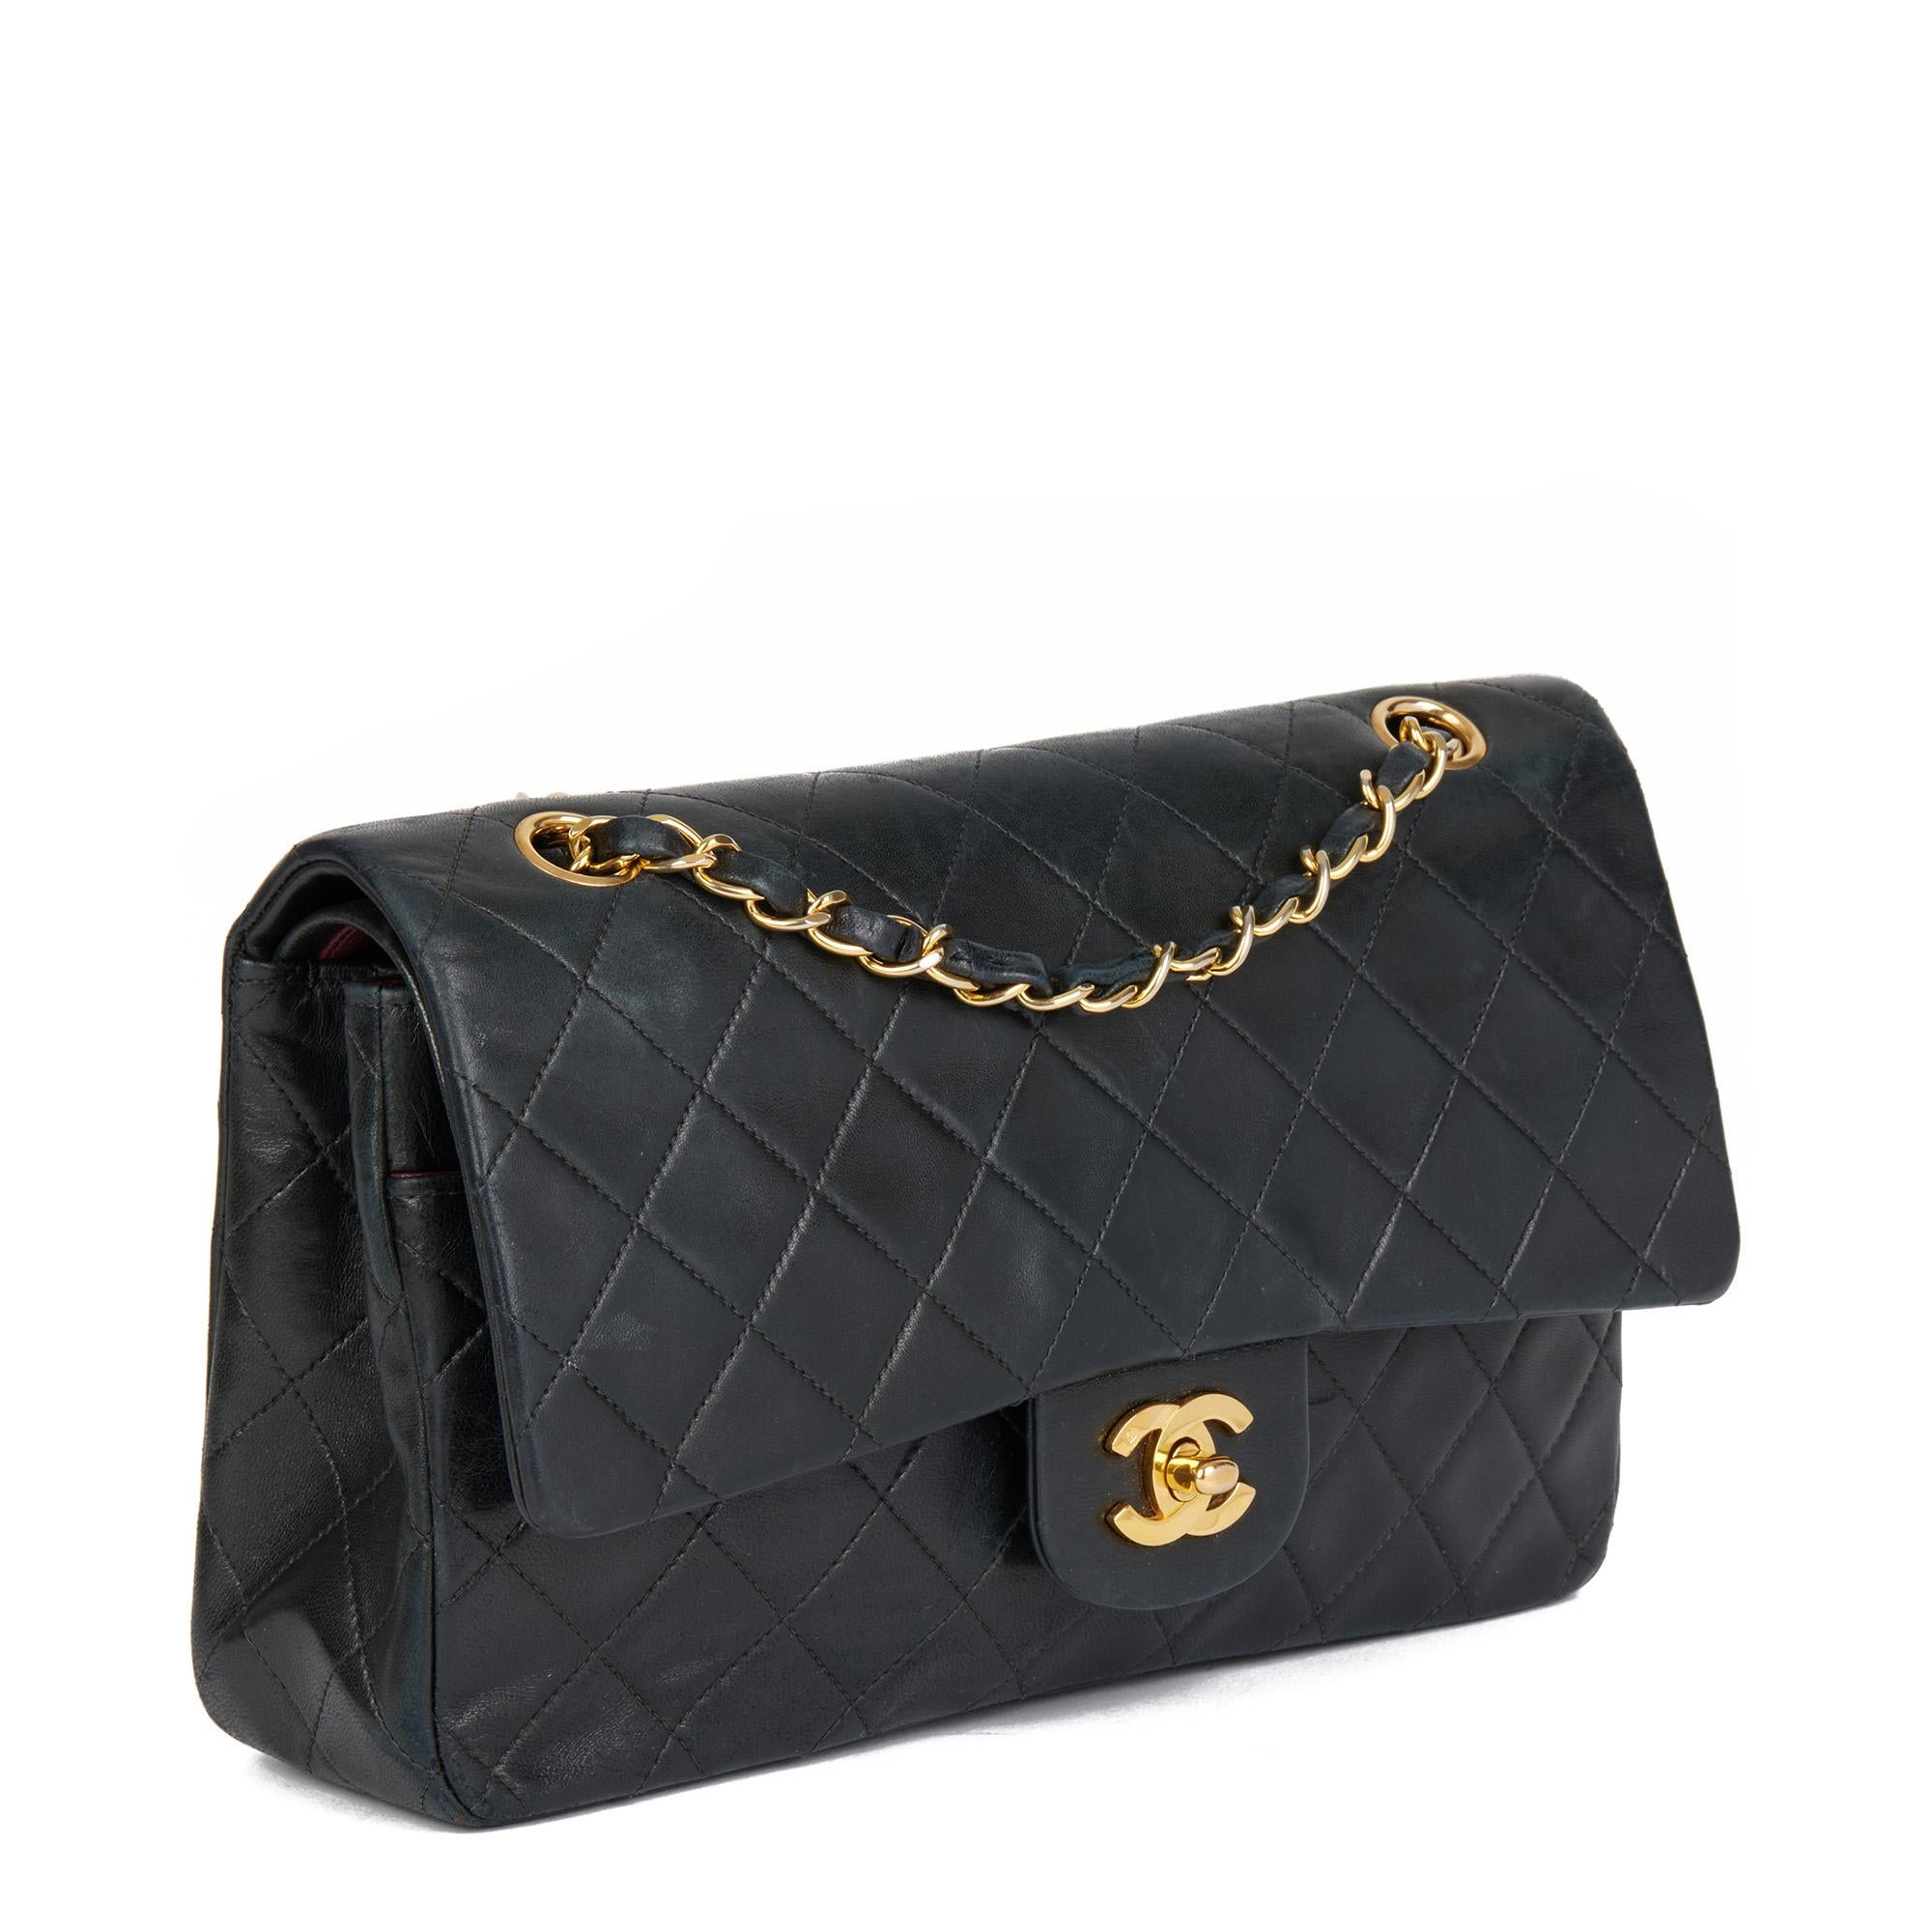 CHANEL
Black Quilted Lambskin Vintage Medium Classic Double Flap Bag

Serial Number: 53*****(Unreadable)
Age (Circa): 1997
Authenticity Details: Authenticity Card, Serial Sticker (Made In France)
Gender: Ladies
Type: Shoulder

Colour: